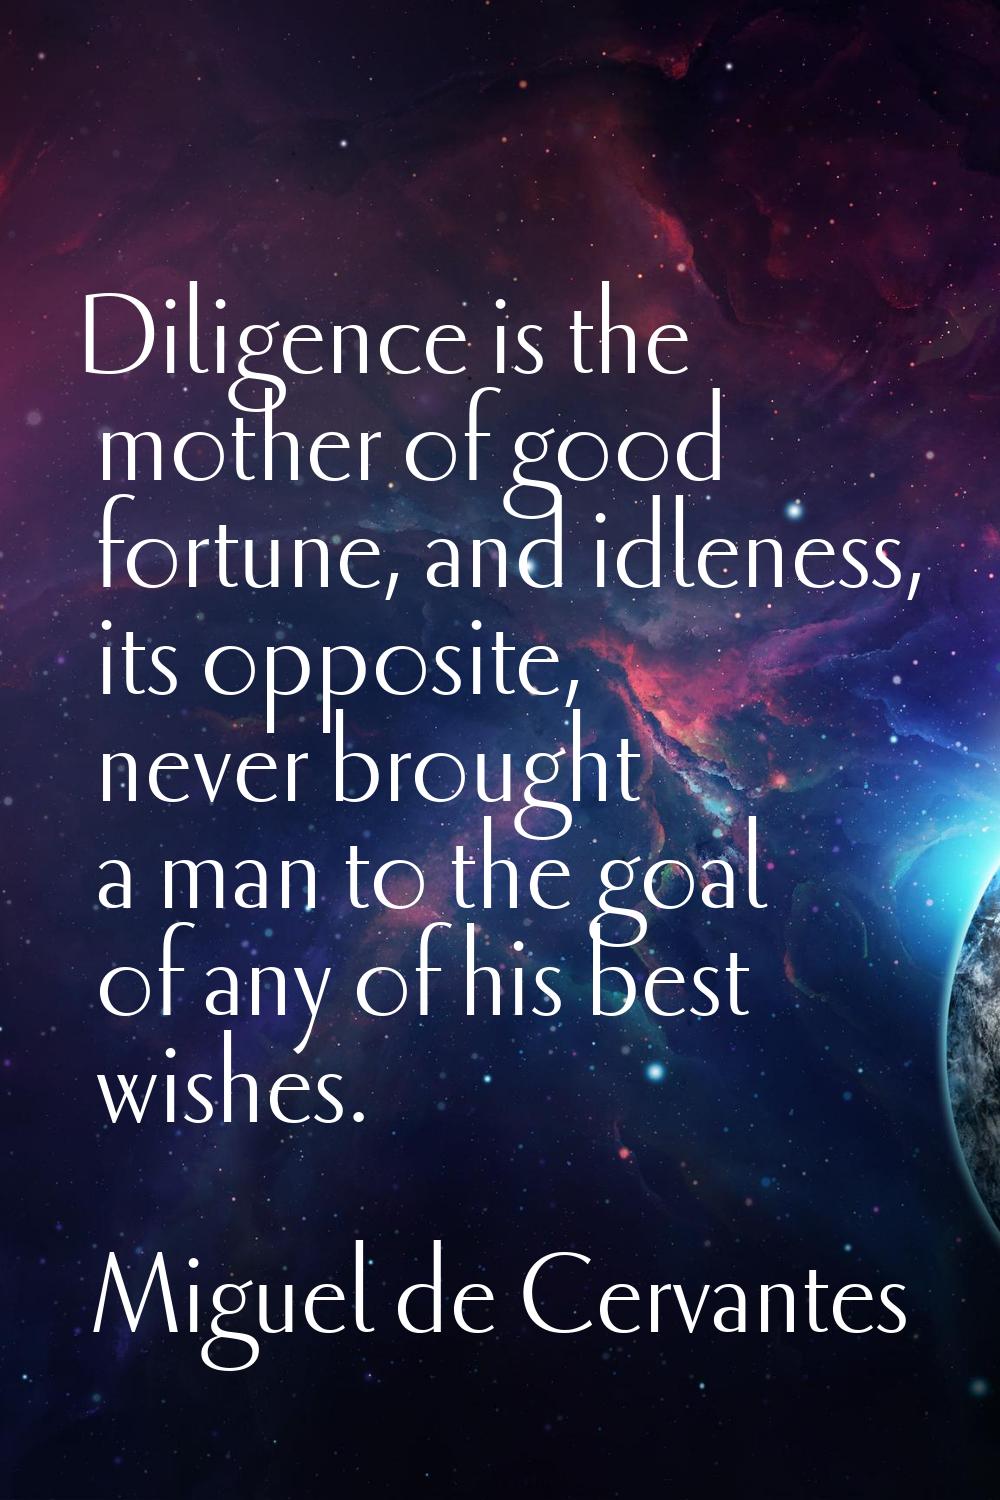 Diligence is the mother of good fortune, and idleness, its opposite, never brought a man to the goa